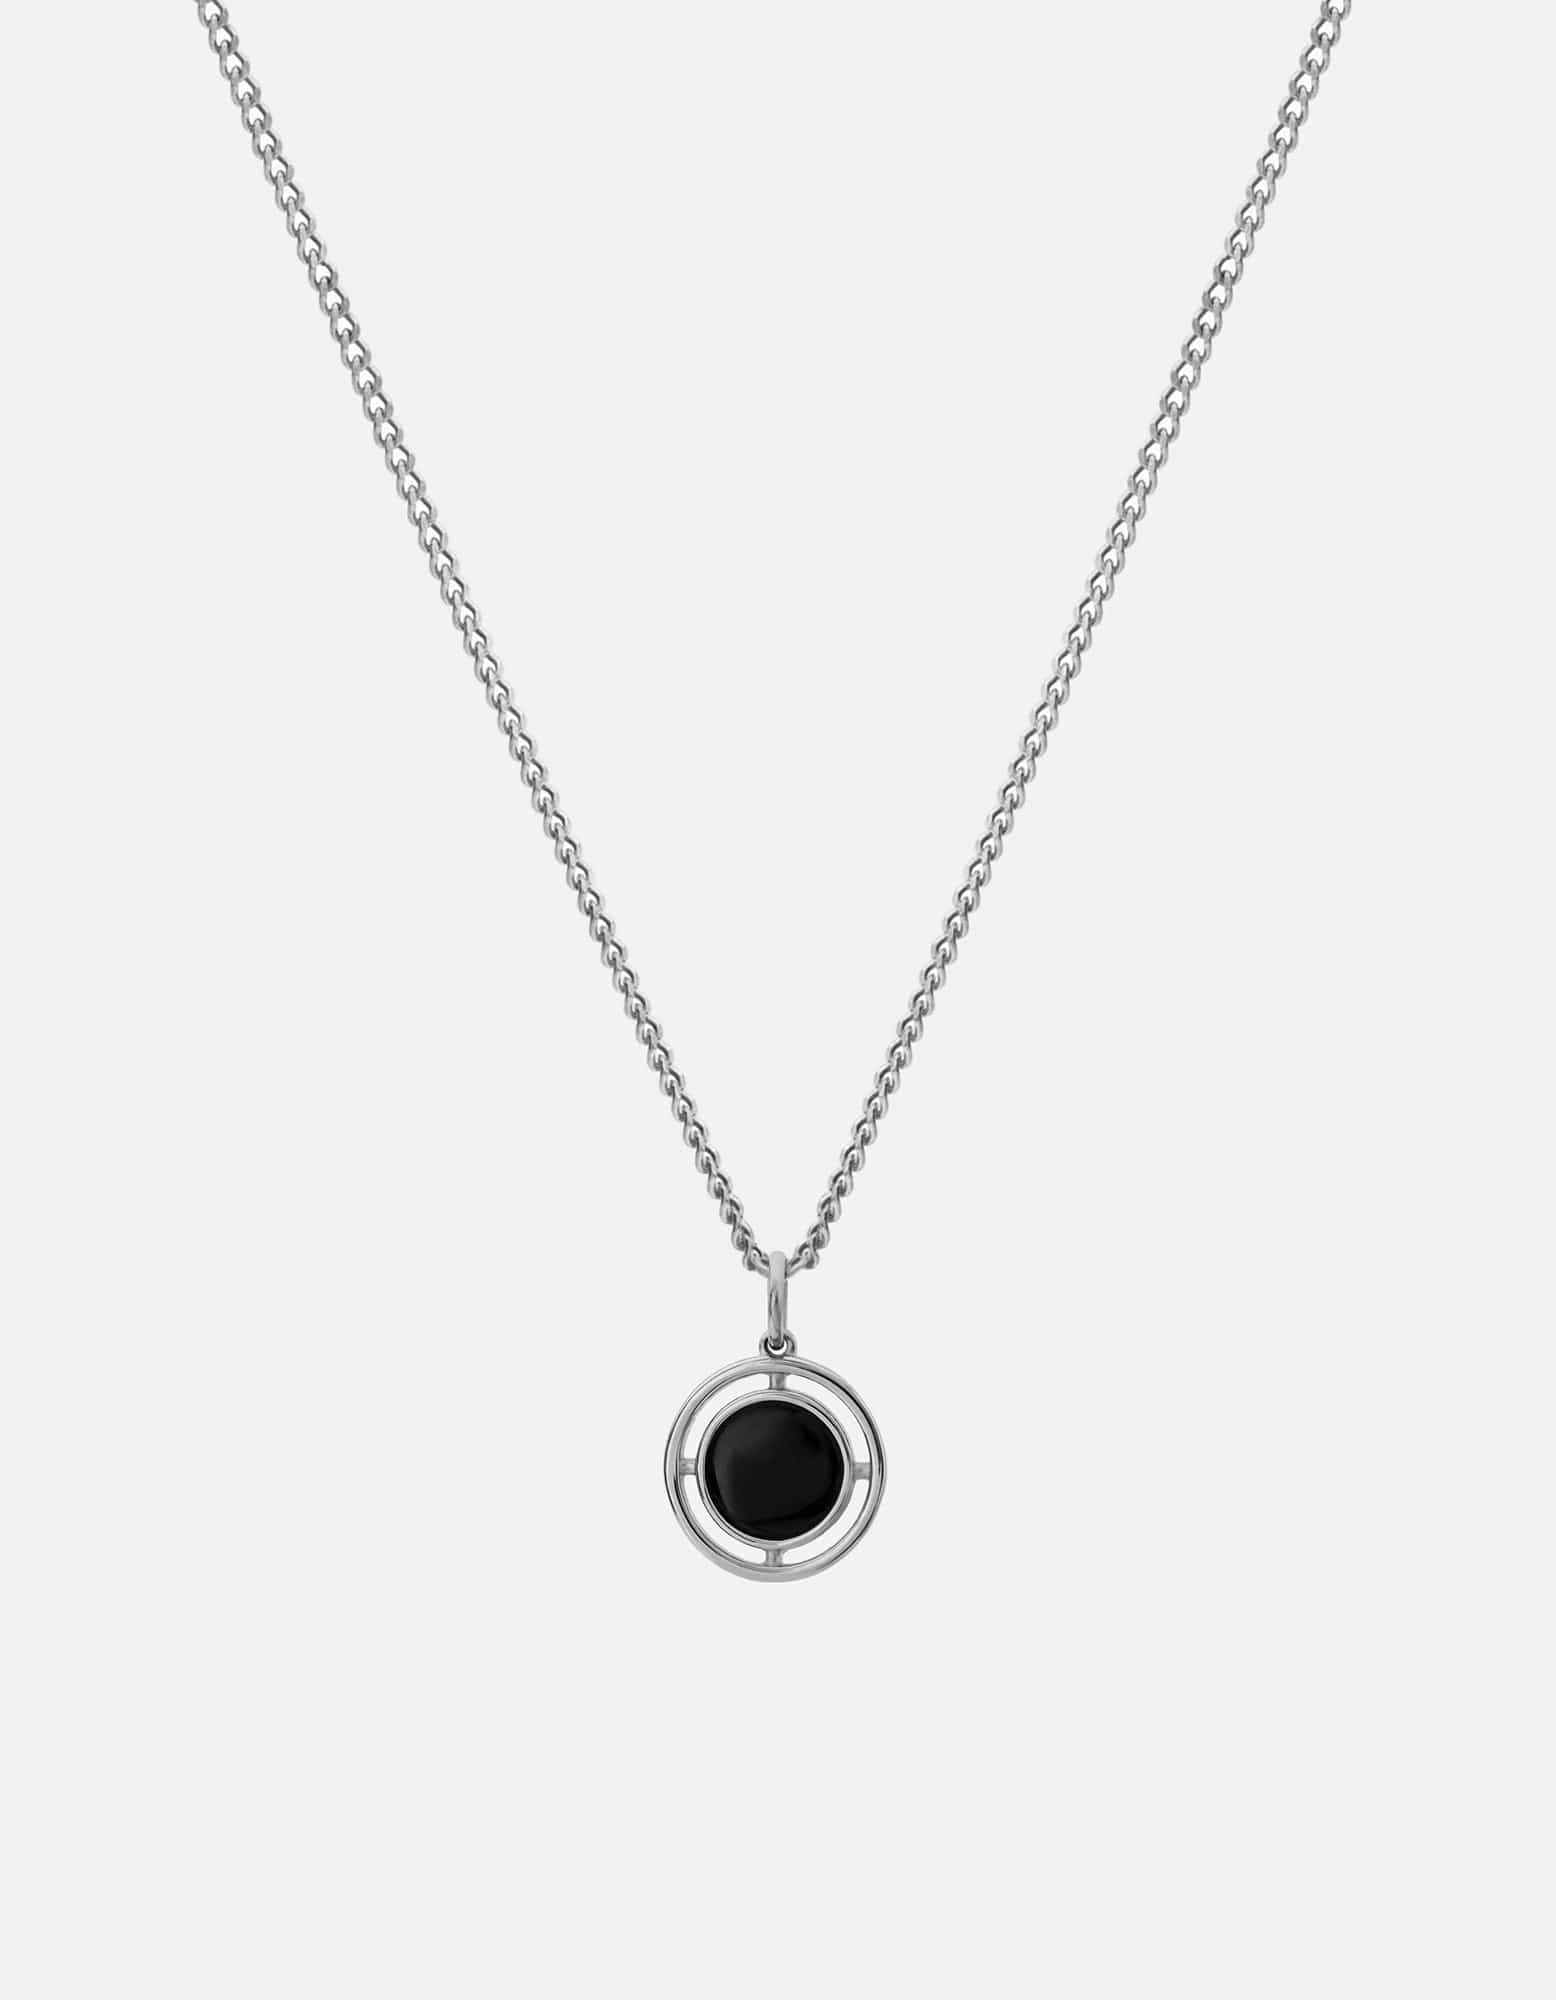 Silver Mens Necklace, Silver Necklace for Men, Compass Pendant Necklace, Mens Jewelry Onyx Necklace, Silver Chain Necklace, Initial Necklace